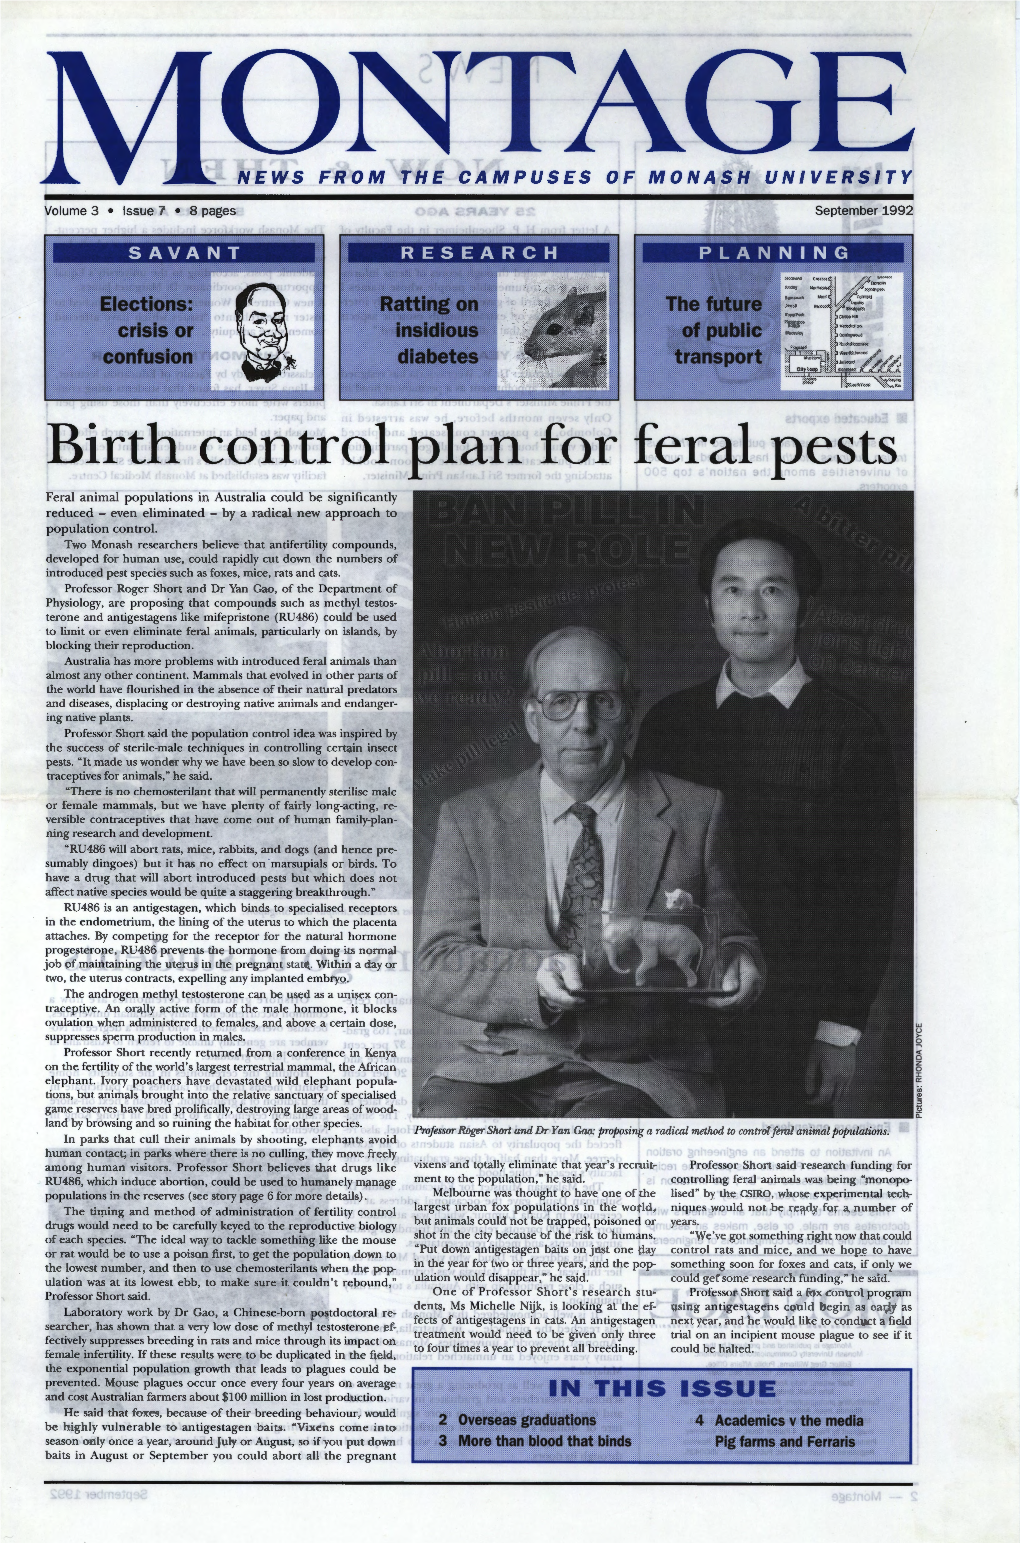 Birth Control Plan for Feral Pests